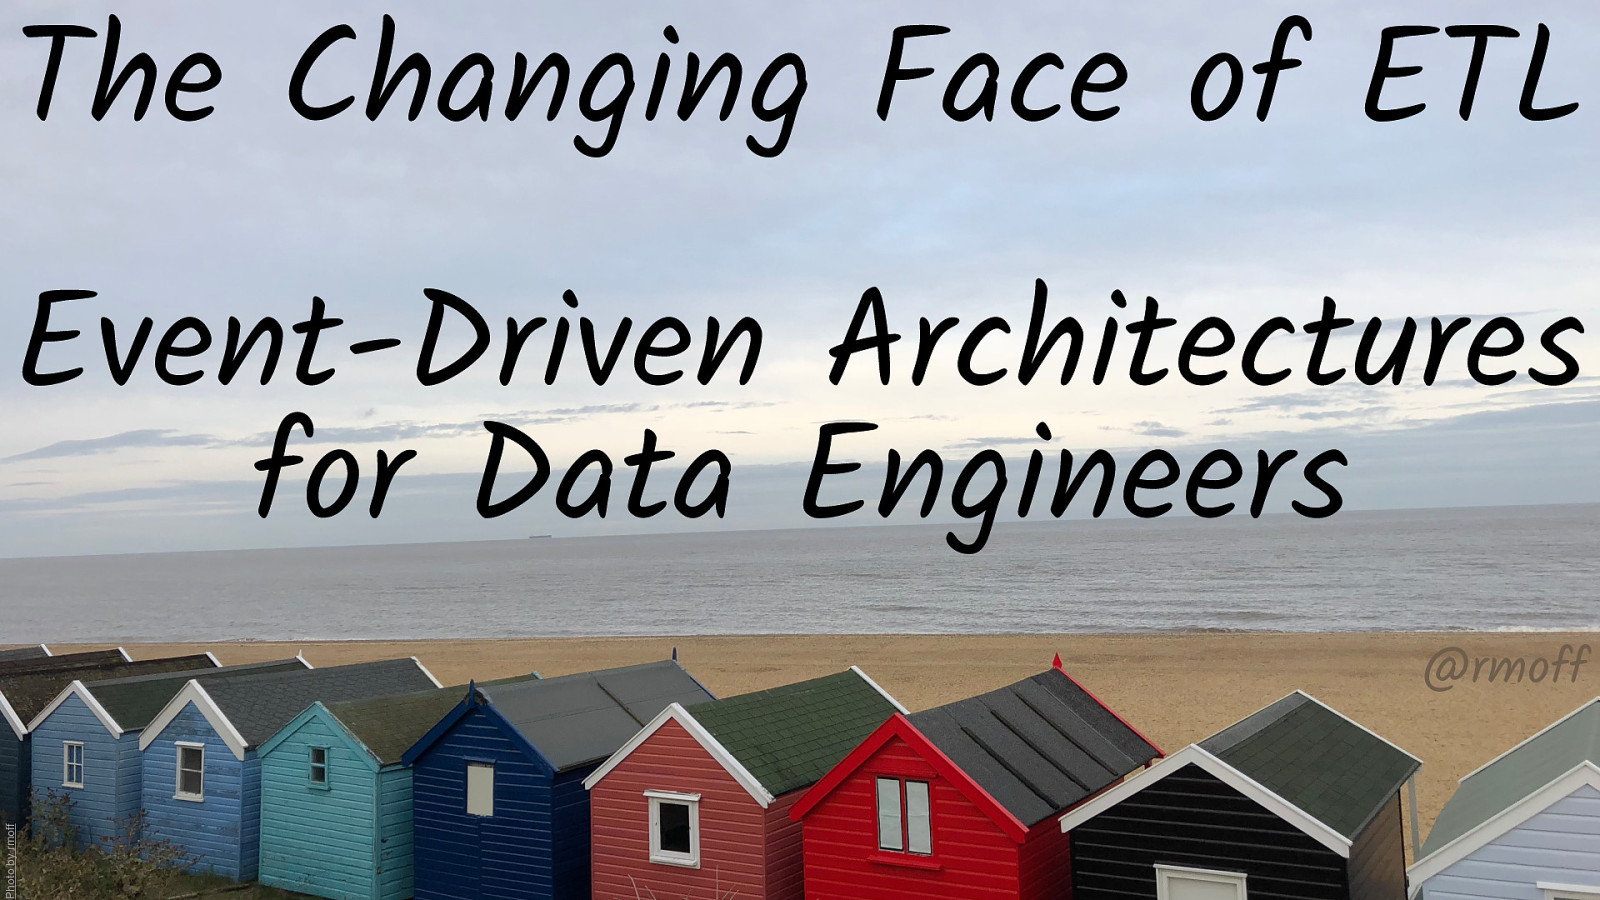 The Changing Face of ETL: Event-Driven Architectures for Data Engineers